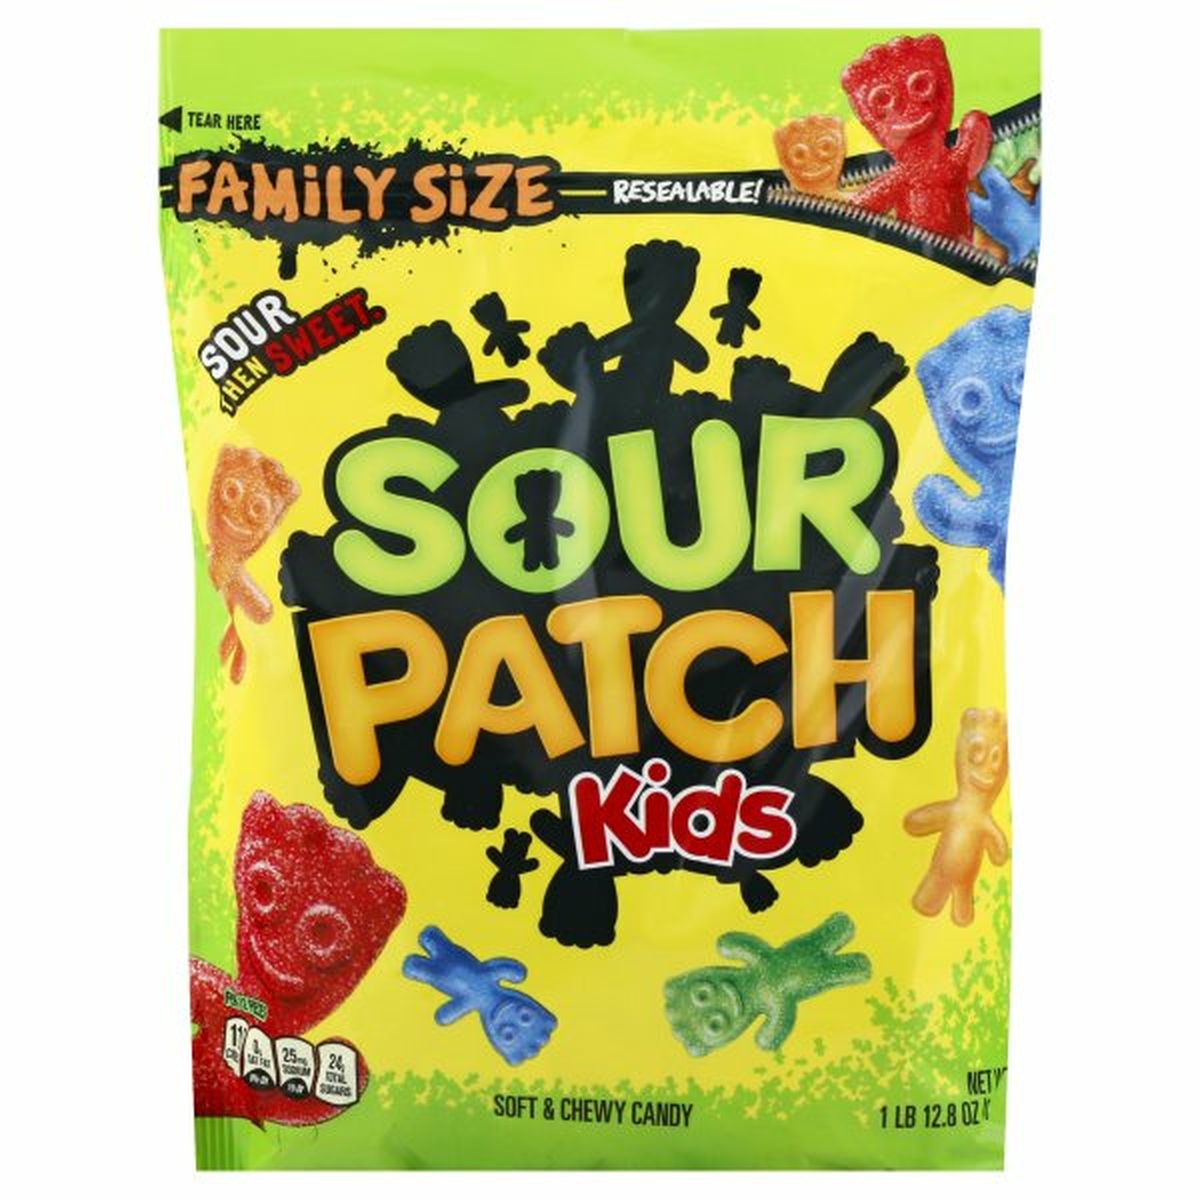 Calories in Sour Patch Kids Kids Candy, Soft & Chewy, Family Size